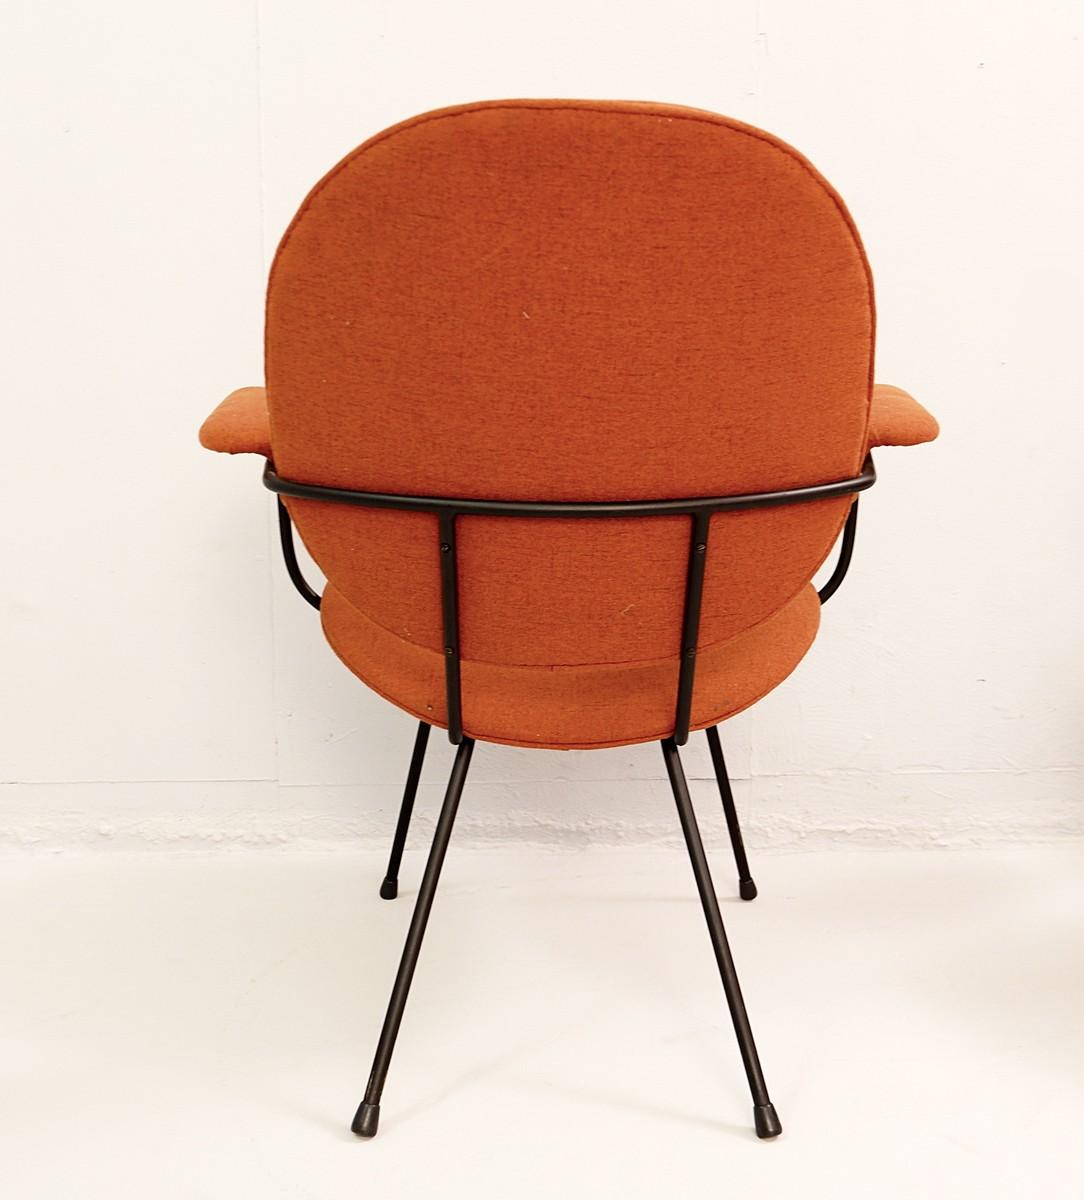 302 armchairs by Willem Hendrik Gispen for Kembo, 1950s.